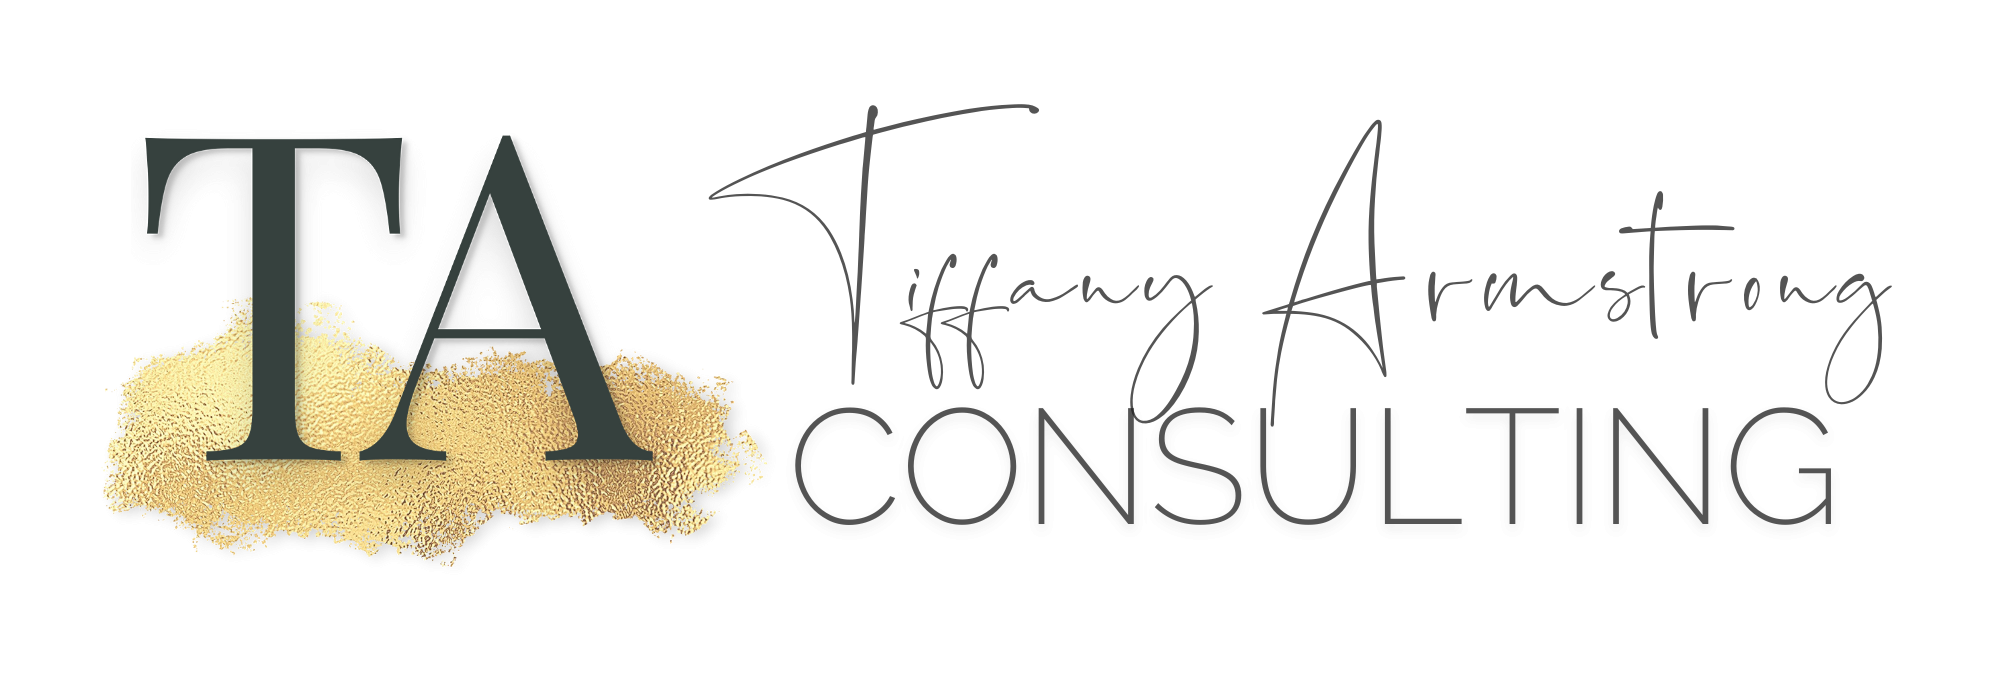 Tiffany Armstrong CONSULTING